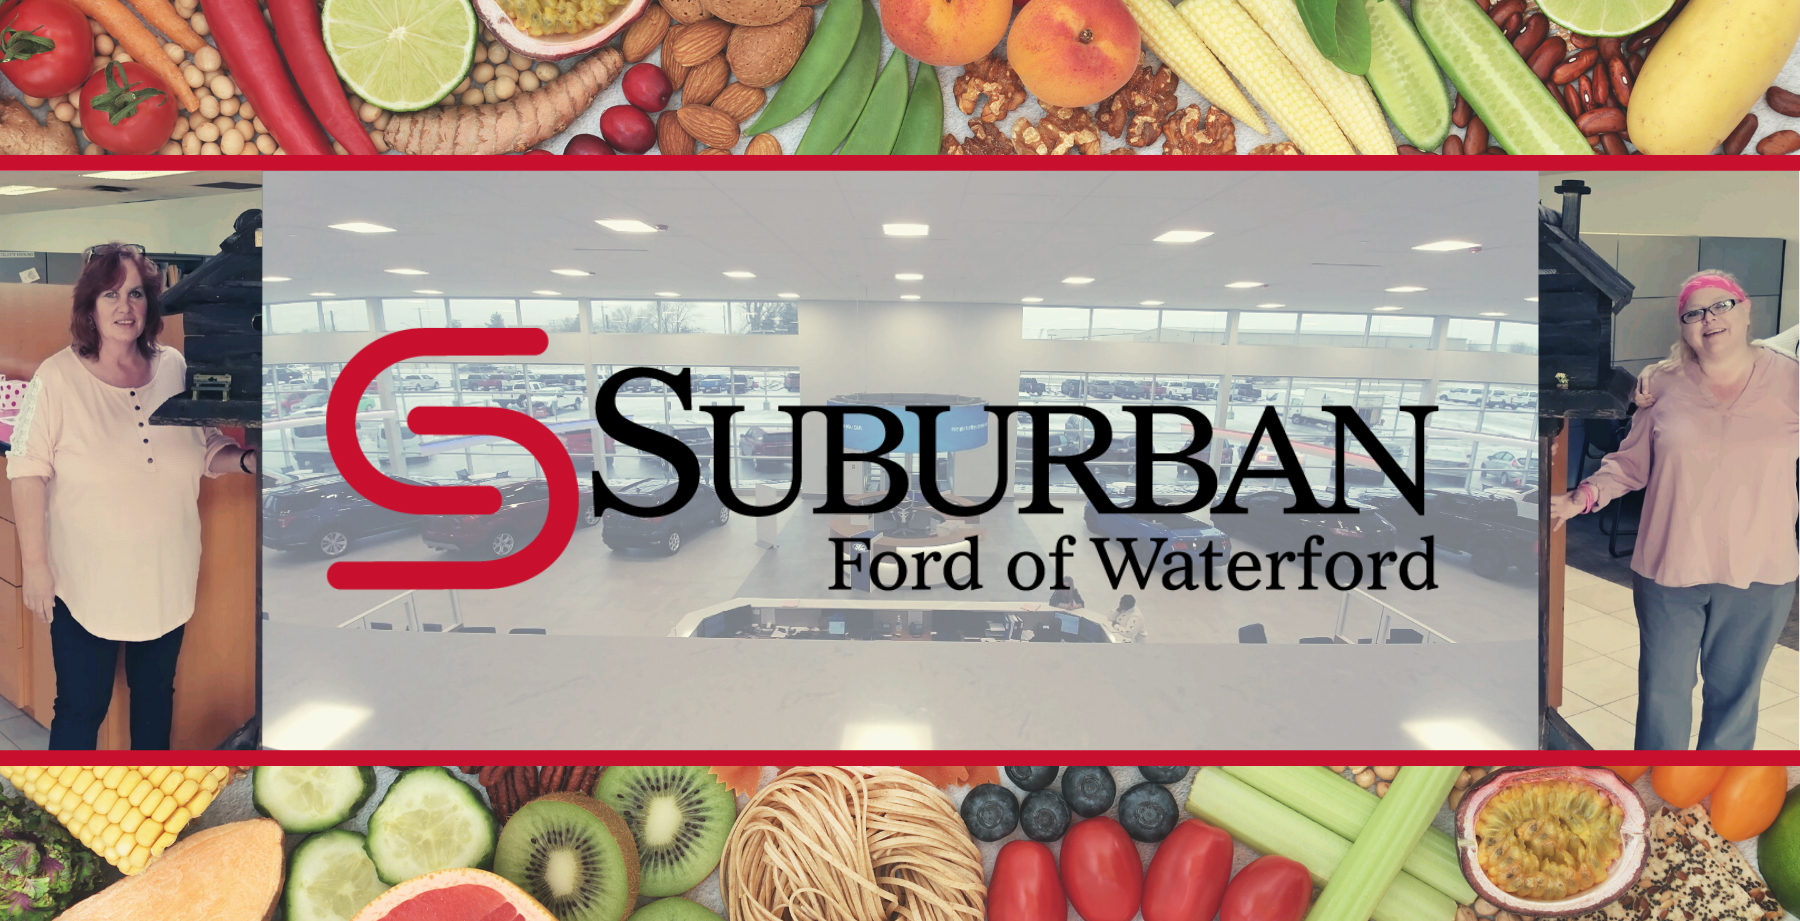 Suburban Ford of Waterford